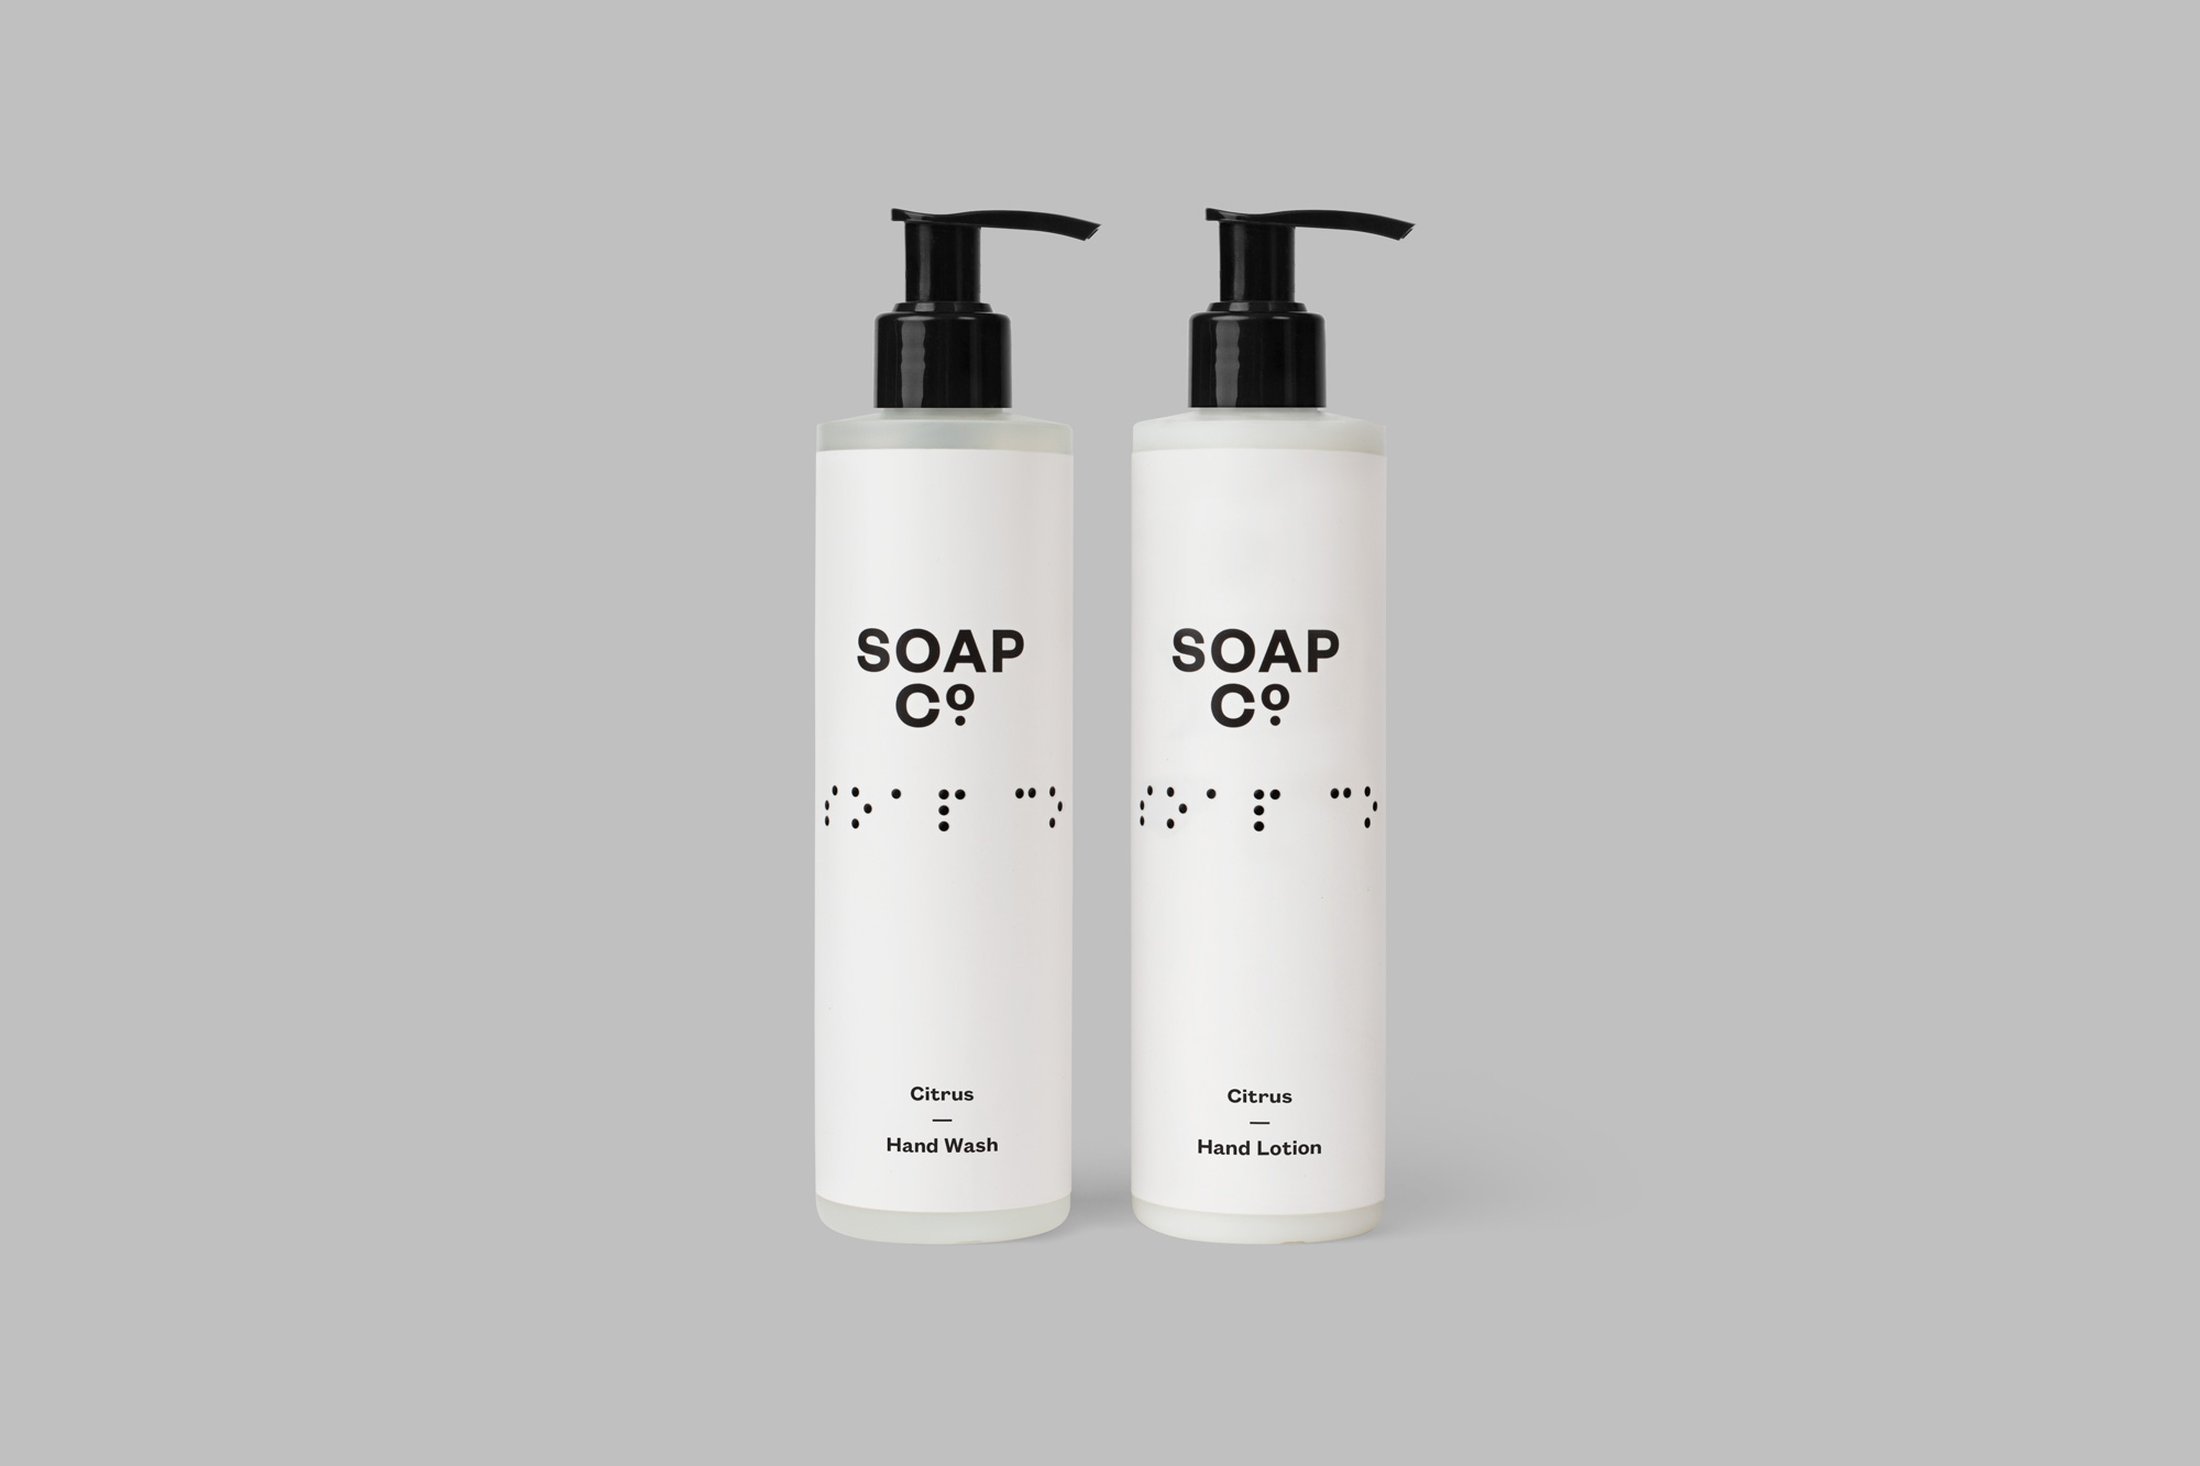 The Soap Co. produce luxury soaps, hand washes and hand lotions.
They employ people who are blind. The logotype is repeated in a tactile braille graphic to reference this.